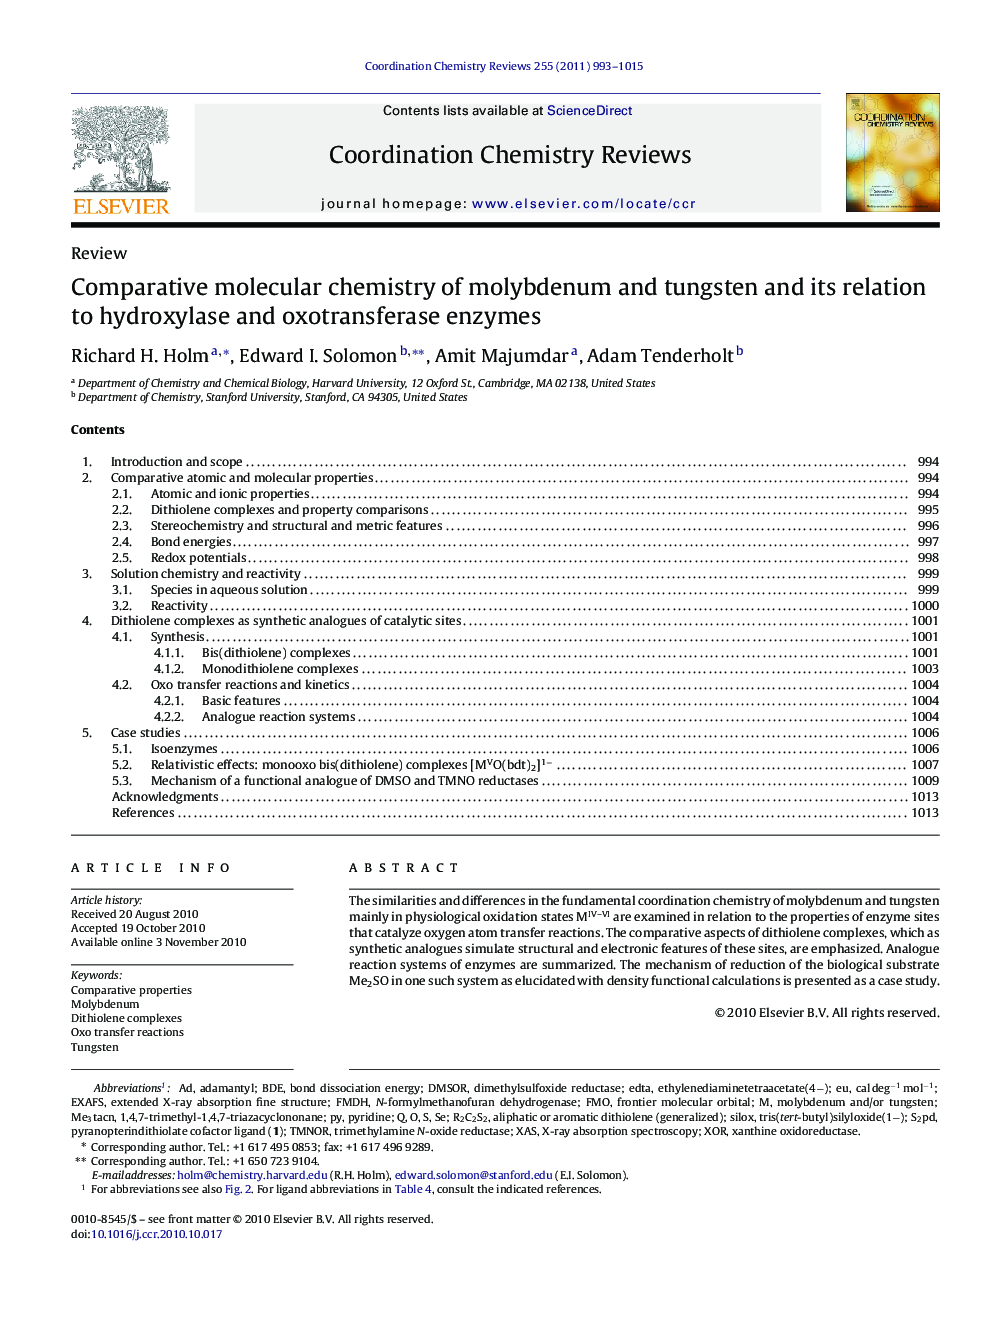 Comparative molecular chemistry of molybdenum and tungsten and its relation to hydroxylase and oxotransferase enzymes